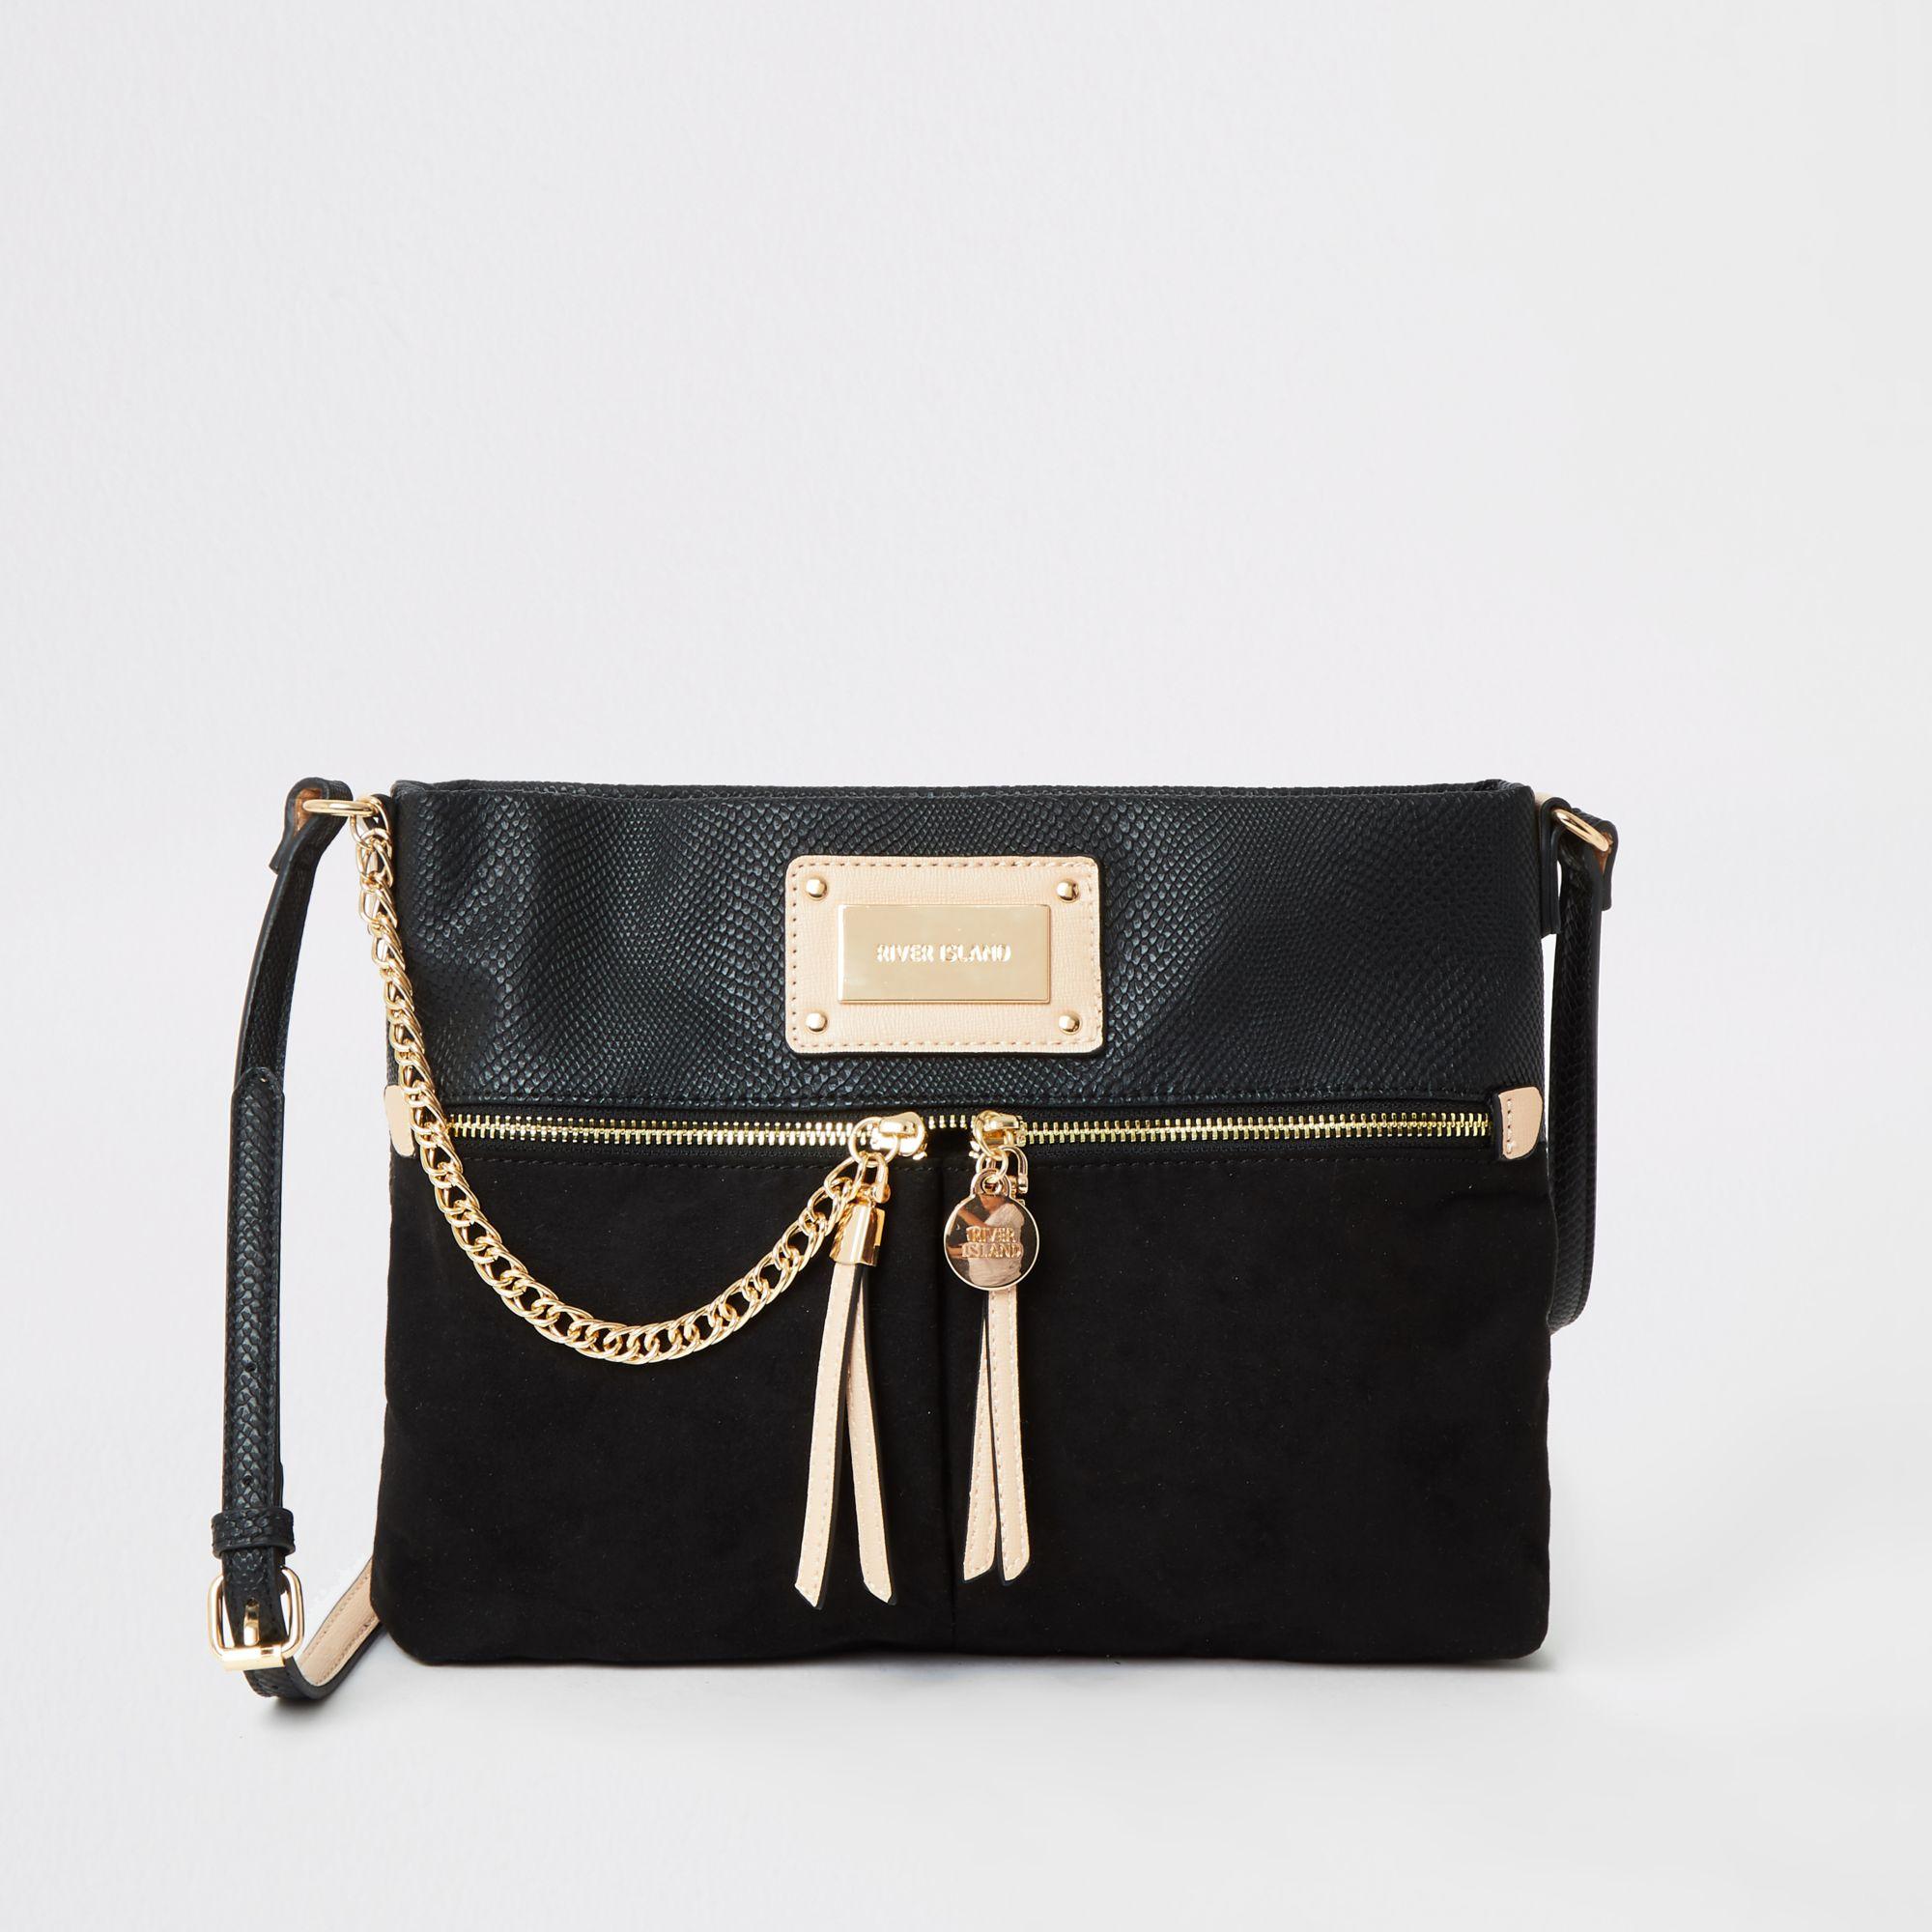 River Island Synthetic Chain Front Cross Body Bag in Black - Lyst